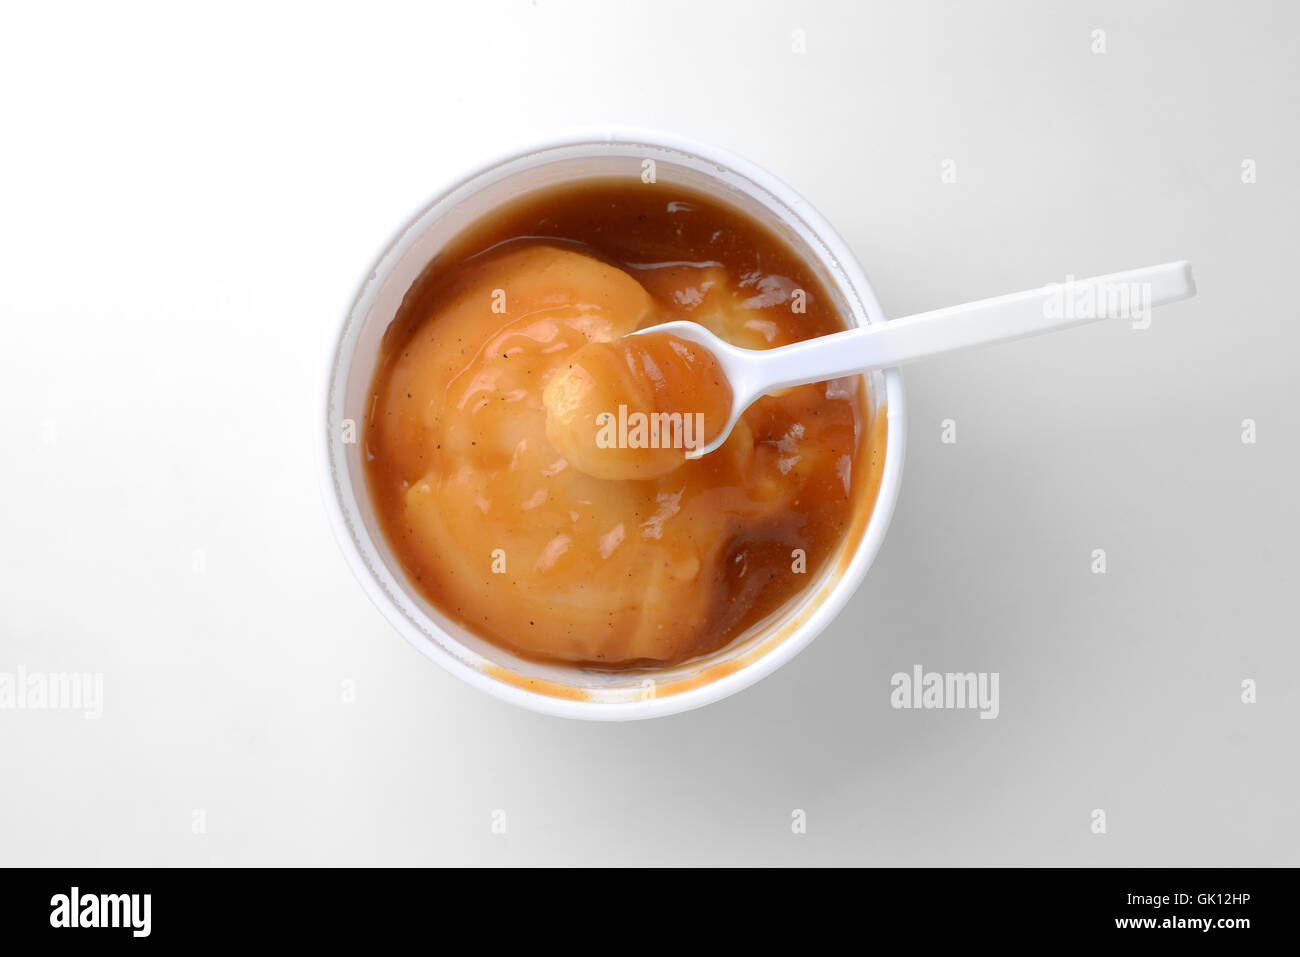 mashed potato with gravy and spoon Stock Photo